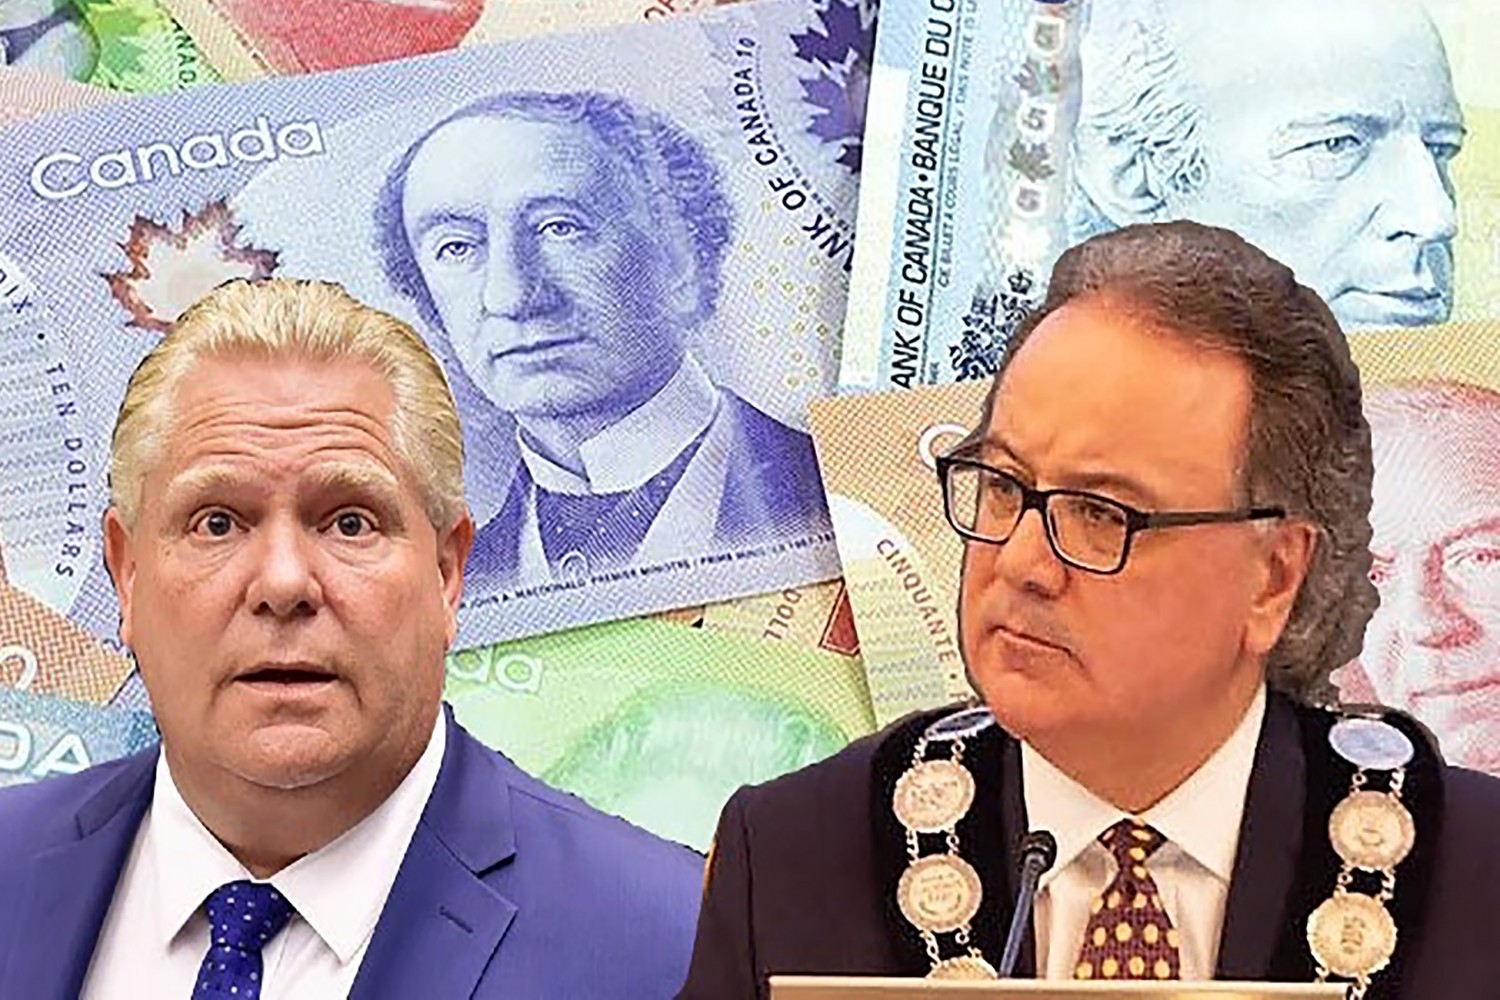 Regional council rubber stamps 2022 budget; staff blame Queen’s Park for additional costs to Peel taxpayers